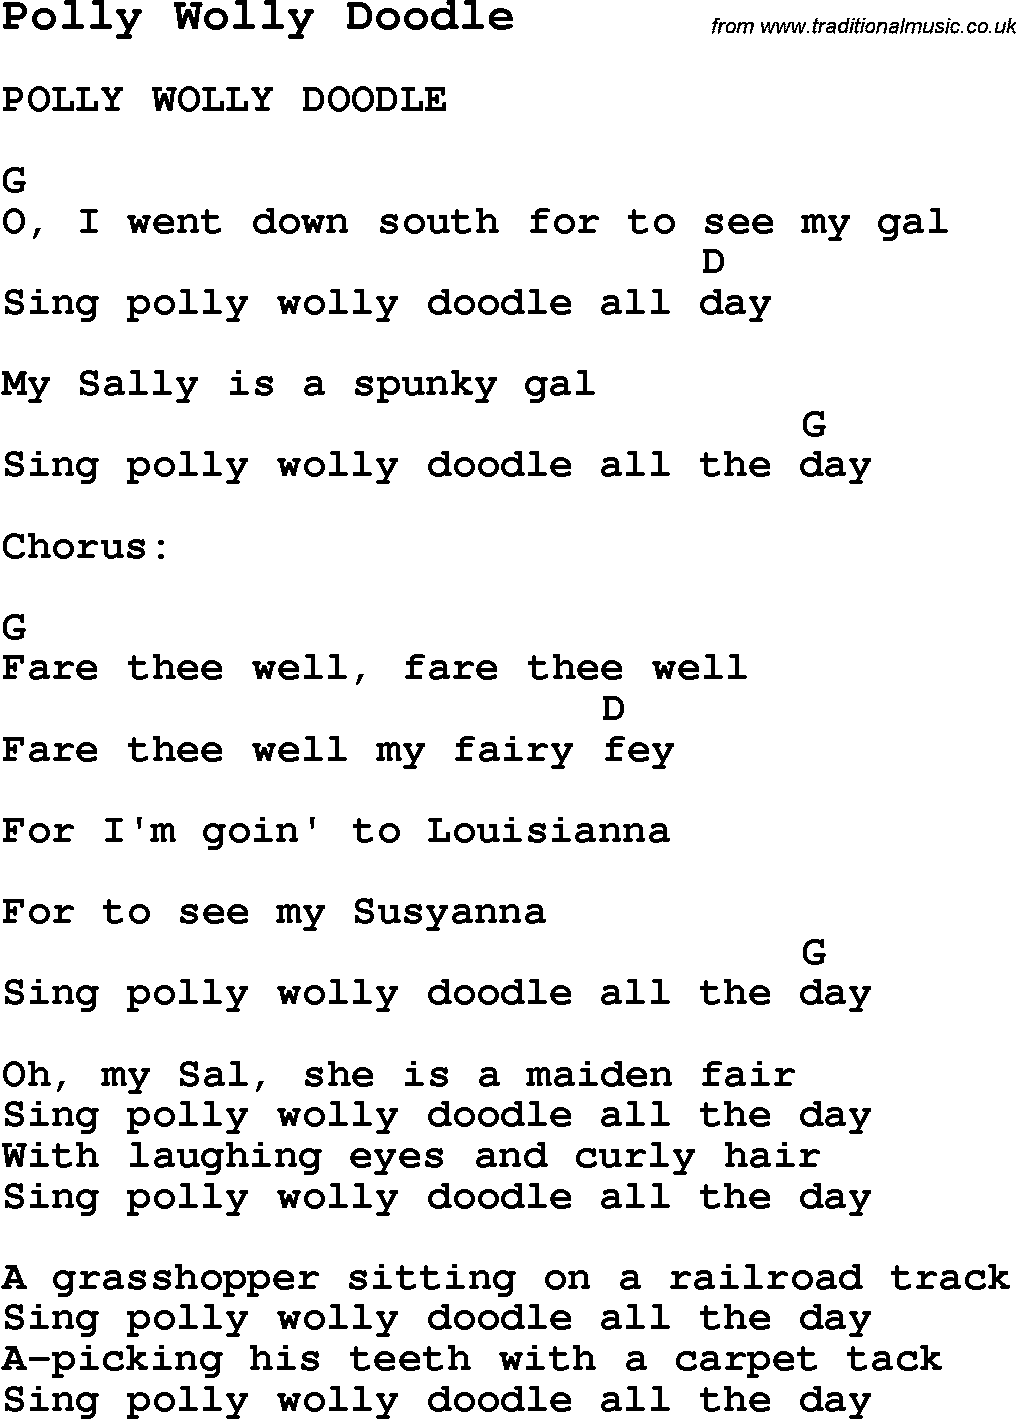 Summer-Camp Song, Polly Wolly Doodle, with lyrics and chords for Ukulele, Guitar Banjo etc.